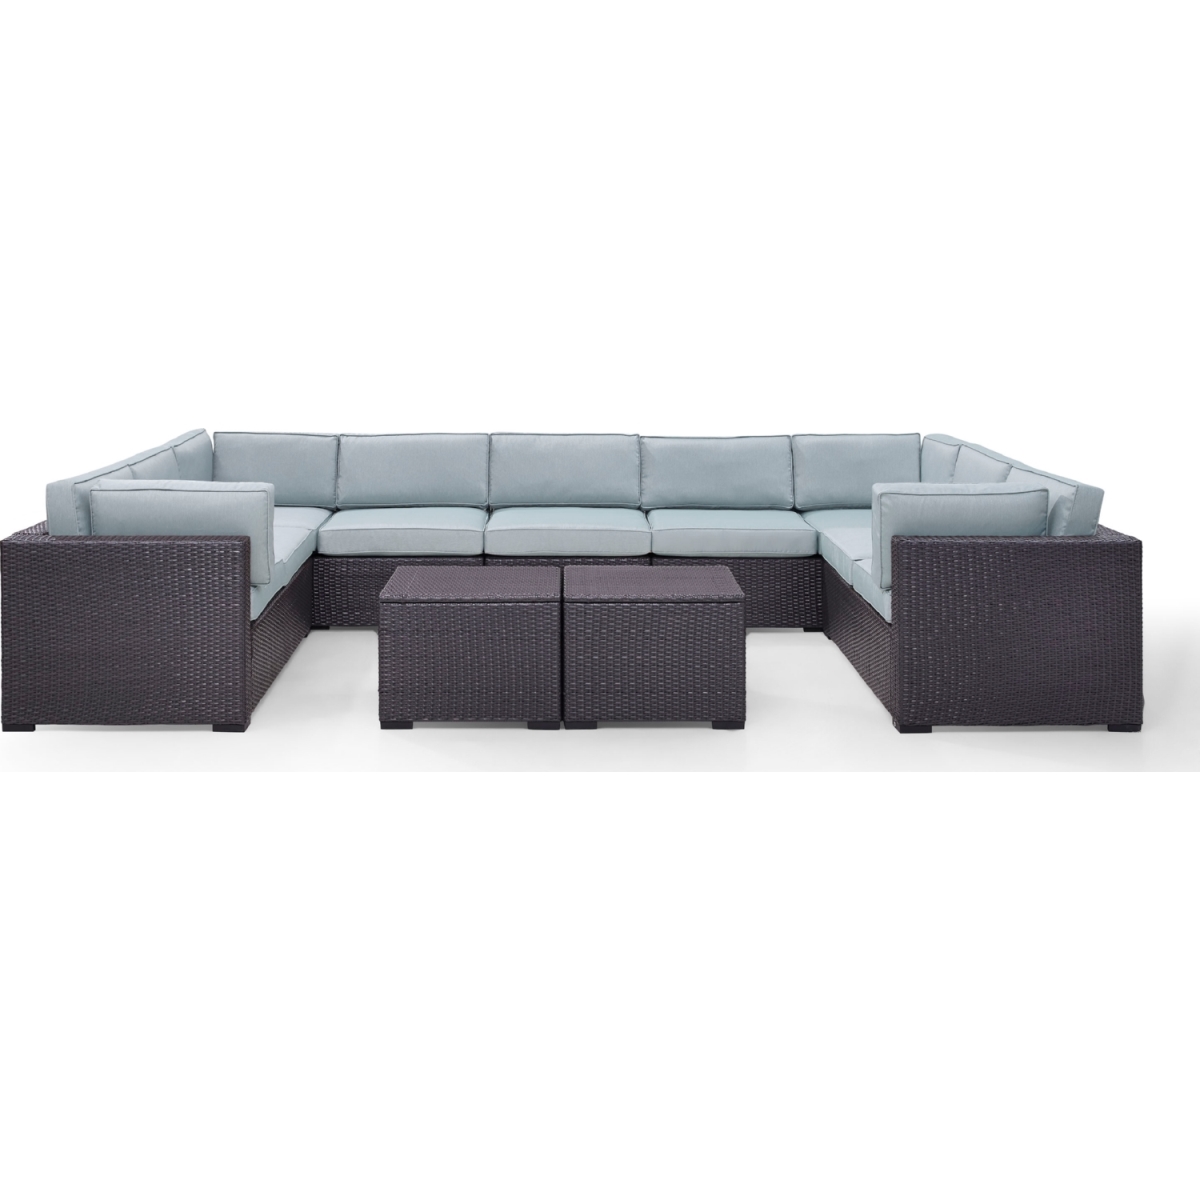 Ko70112br-mi Biscayne 9 Person Outdoor Wicker Seating Set, Mist - Four Loveseats, One Armless Chair, Two Coffee Tables